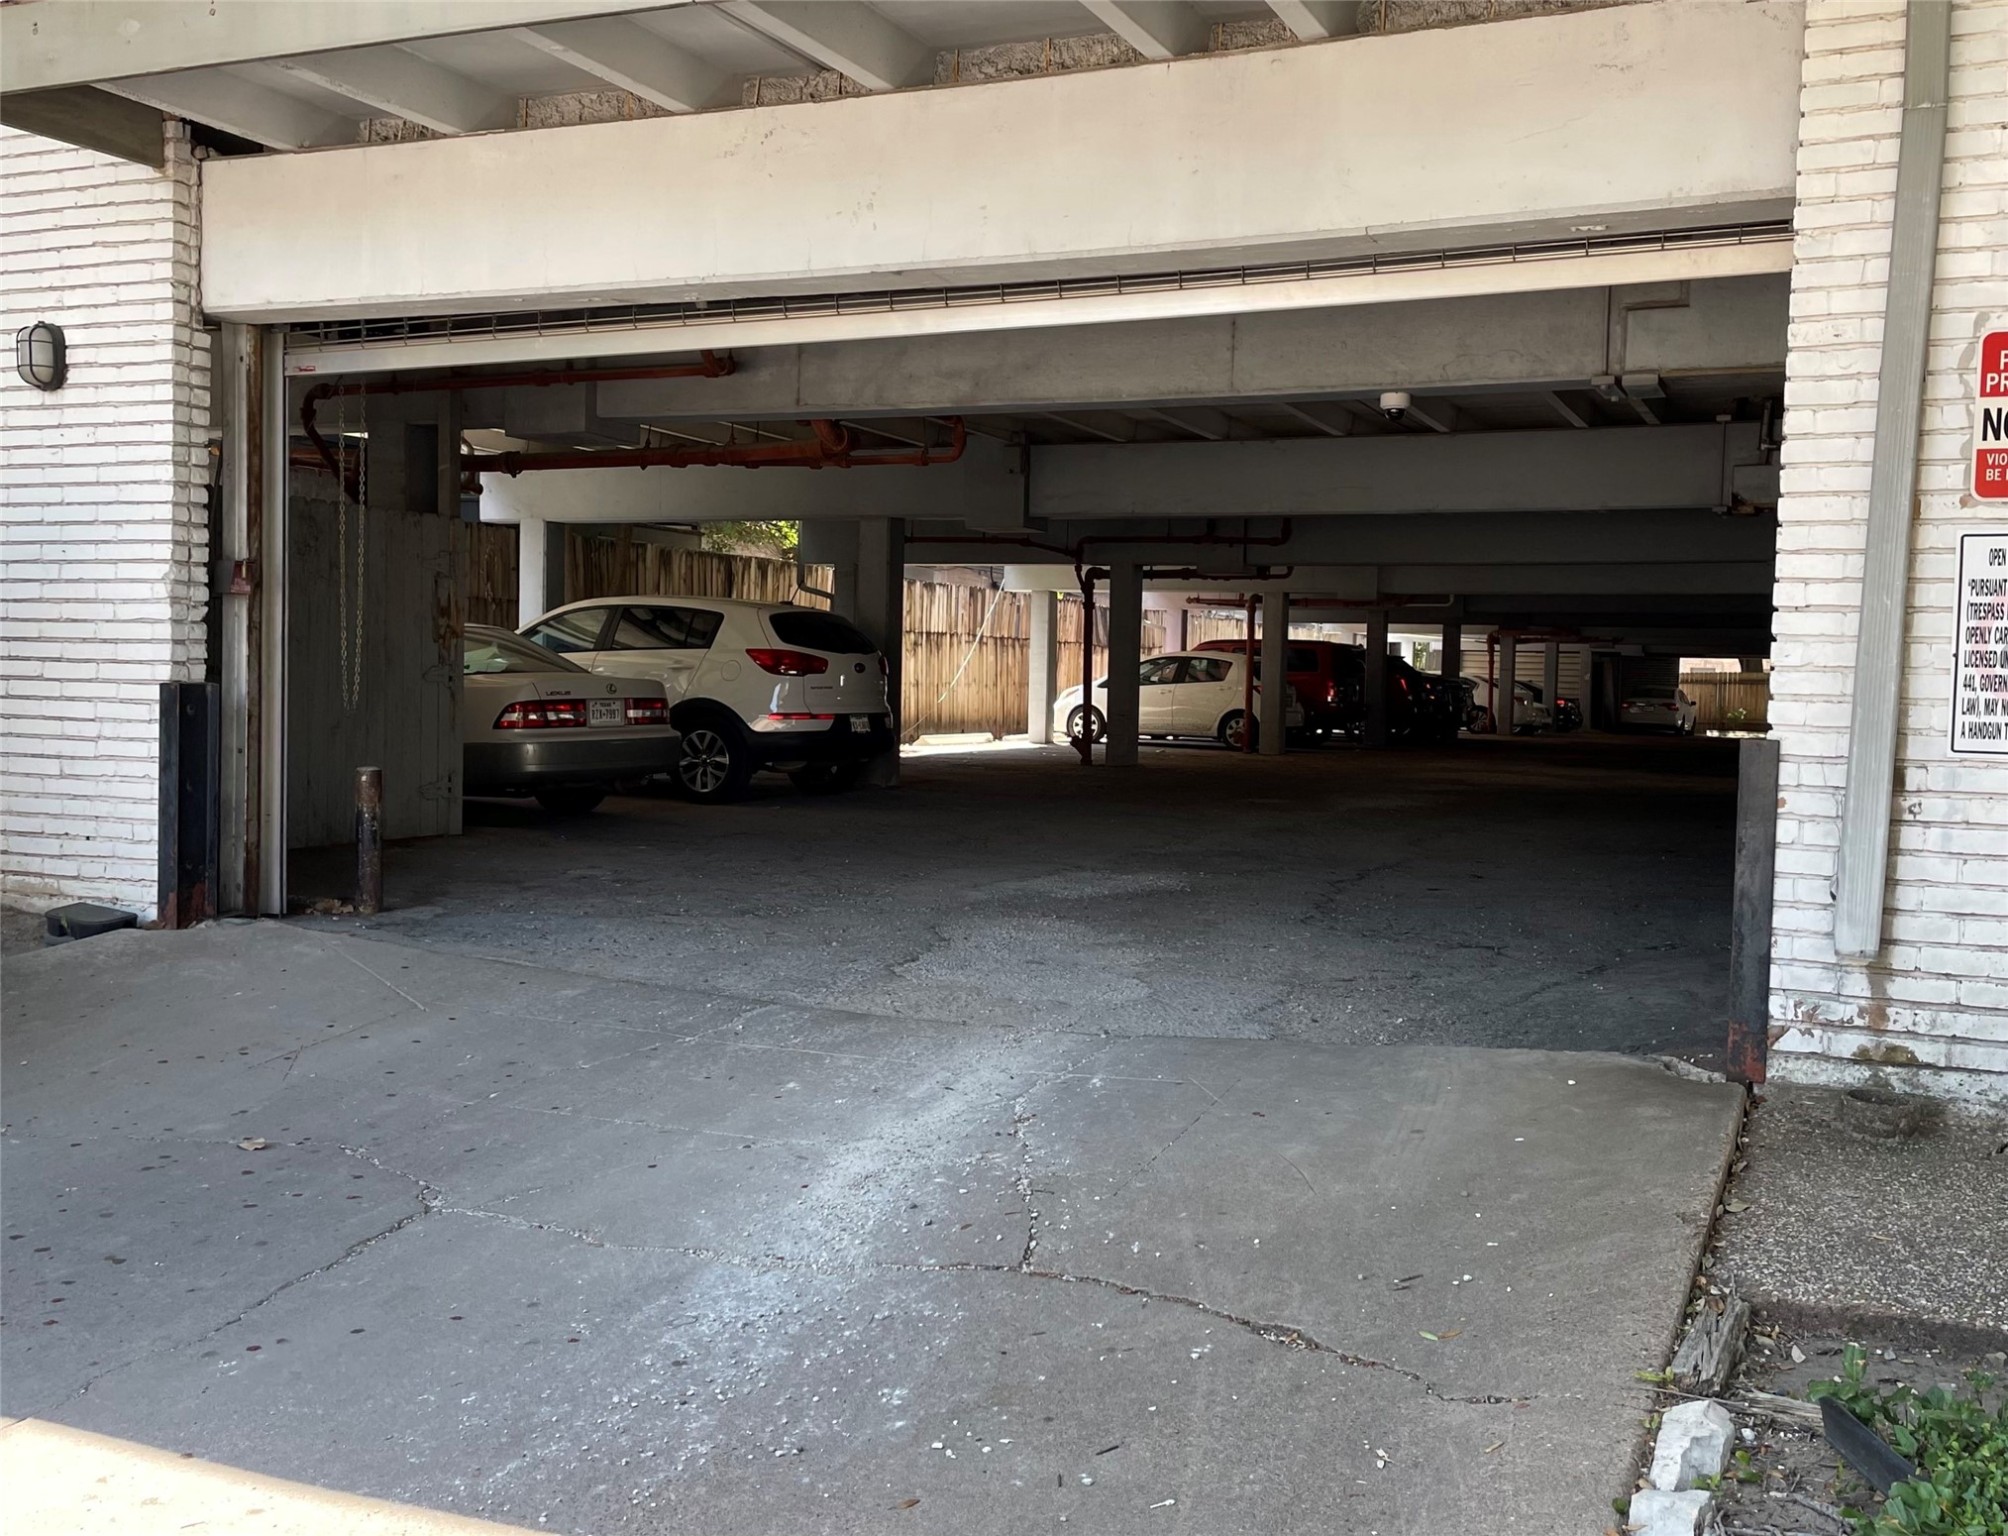 This condo has one assigned space in the garage.